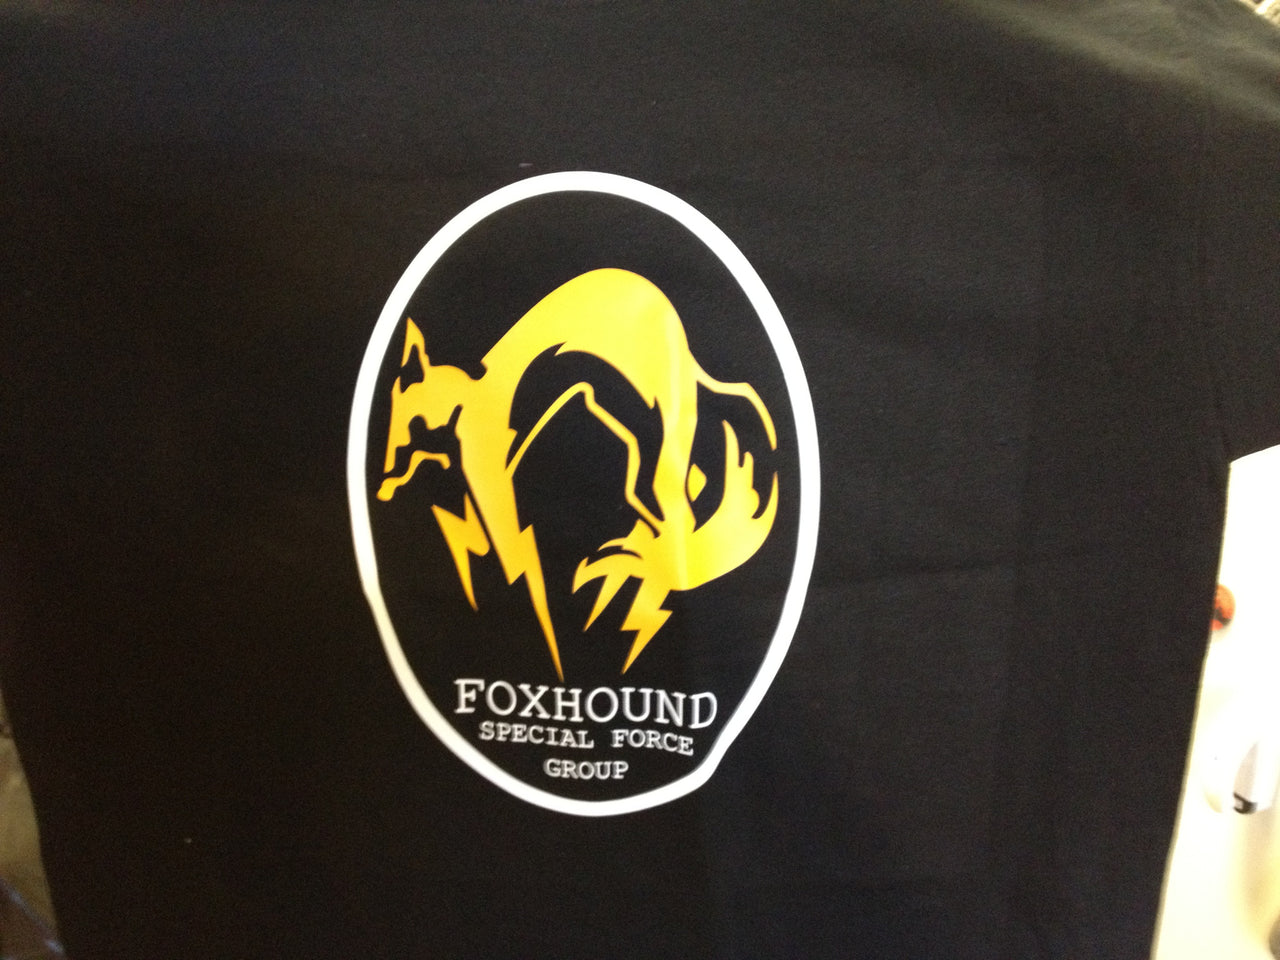 Metal Gear Solid Fox Hound Special Force Group Tshirt: Black With Yellow and White Print - TshirtNow.net - 3